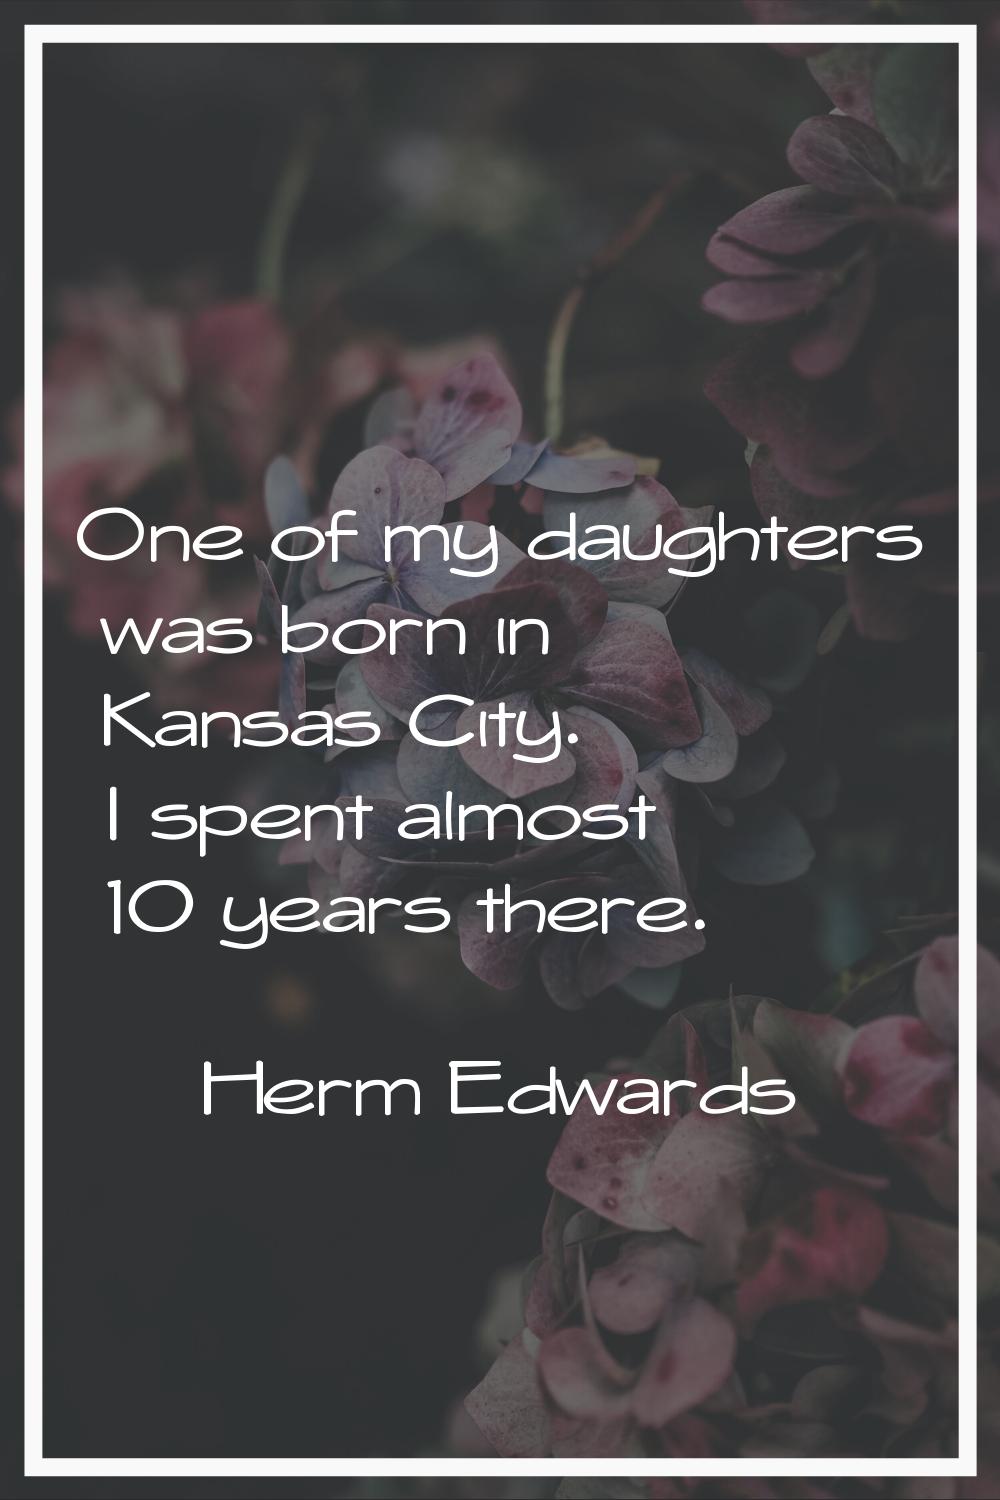 One of my daughters was born in Kansas City. I spent almost 10 years there.